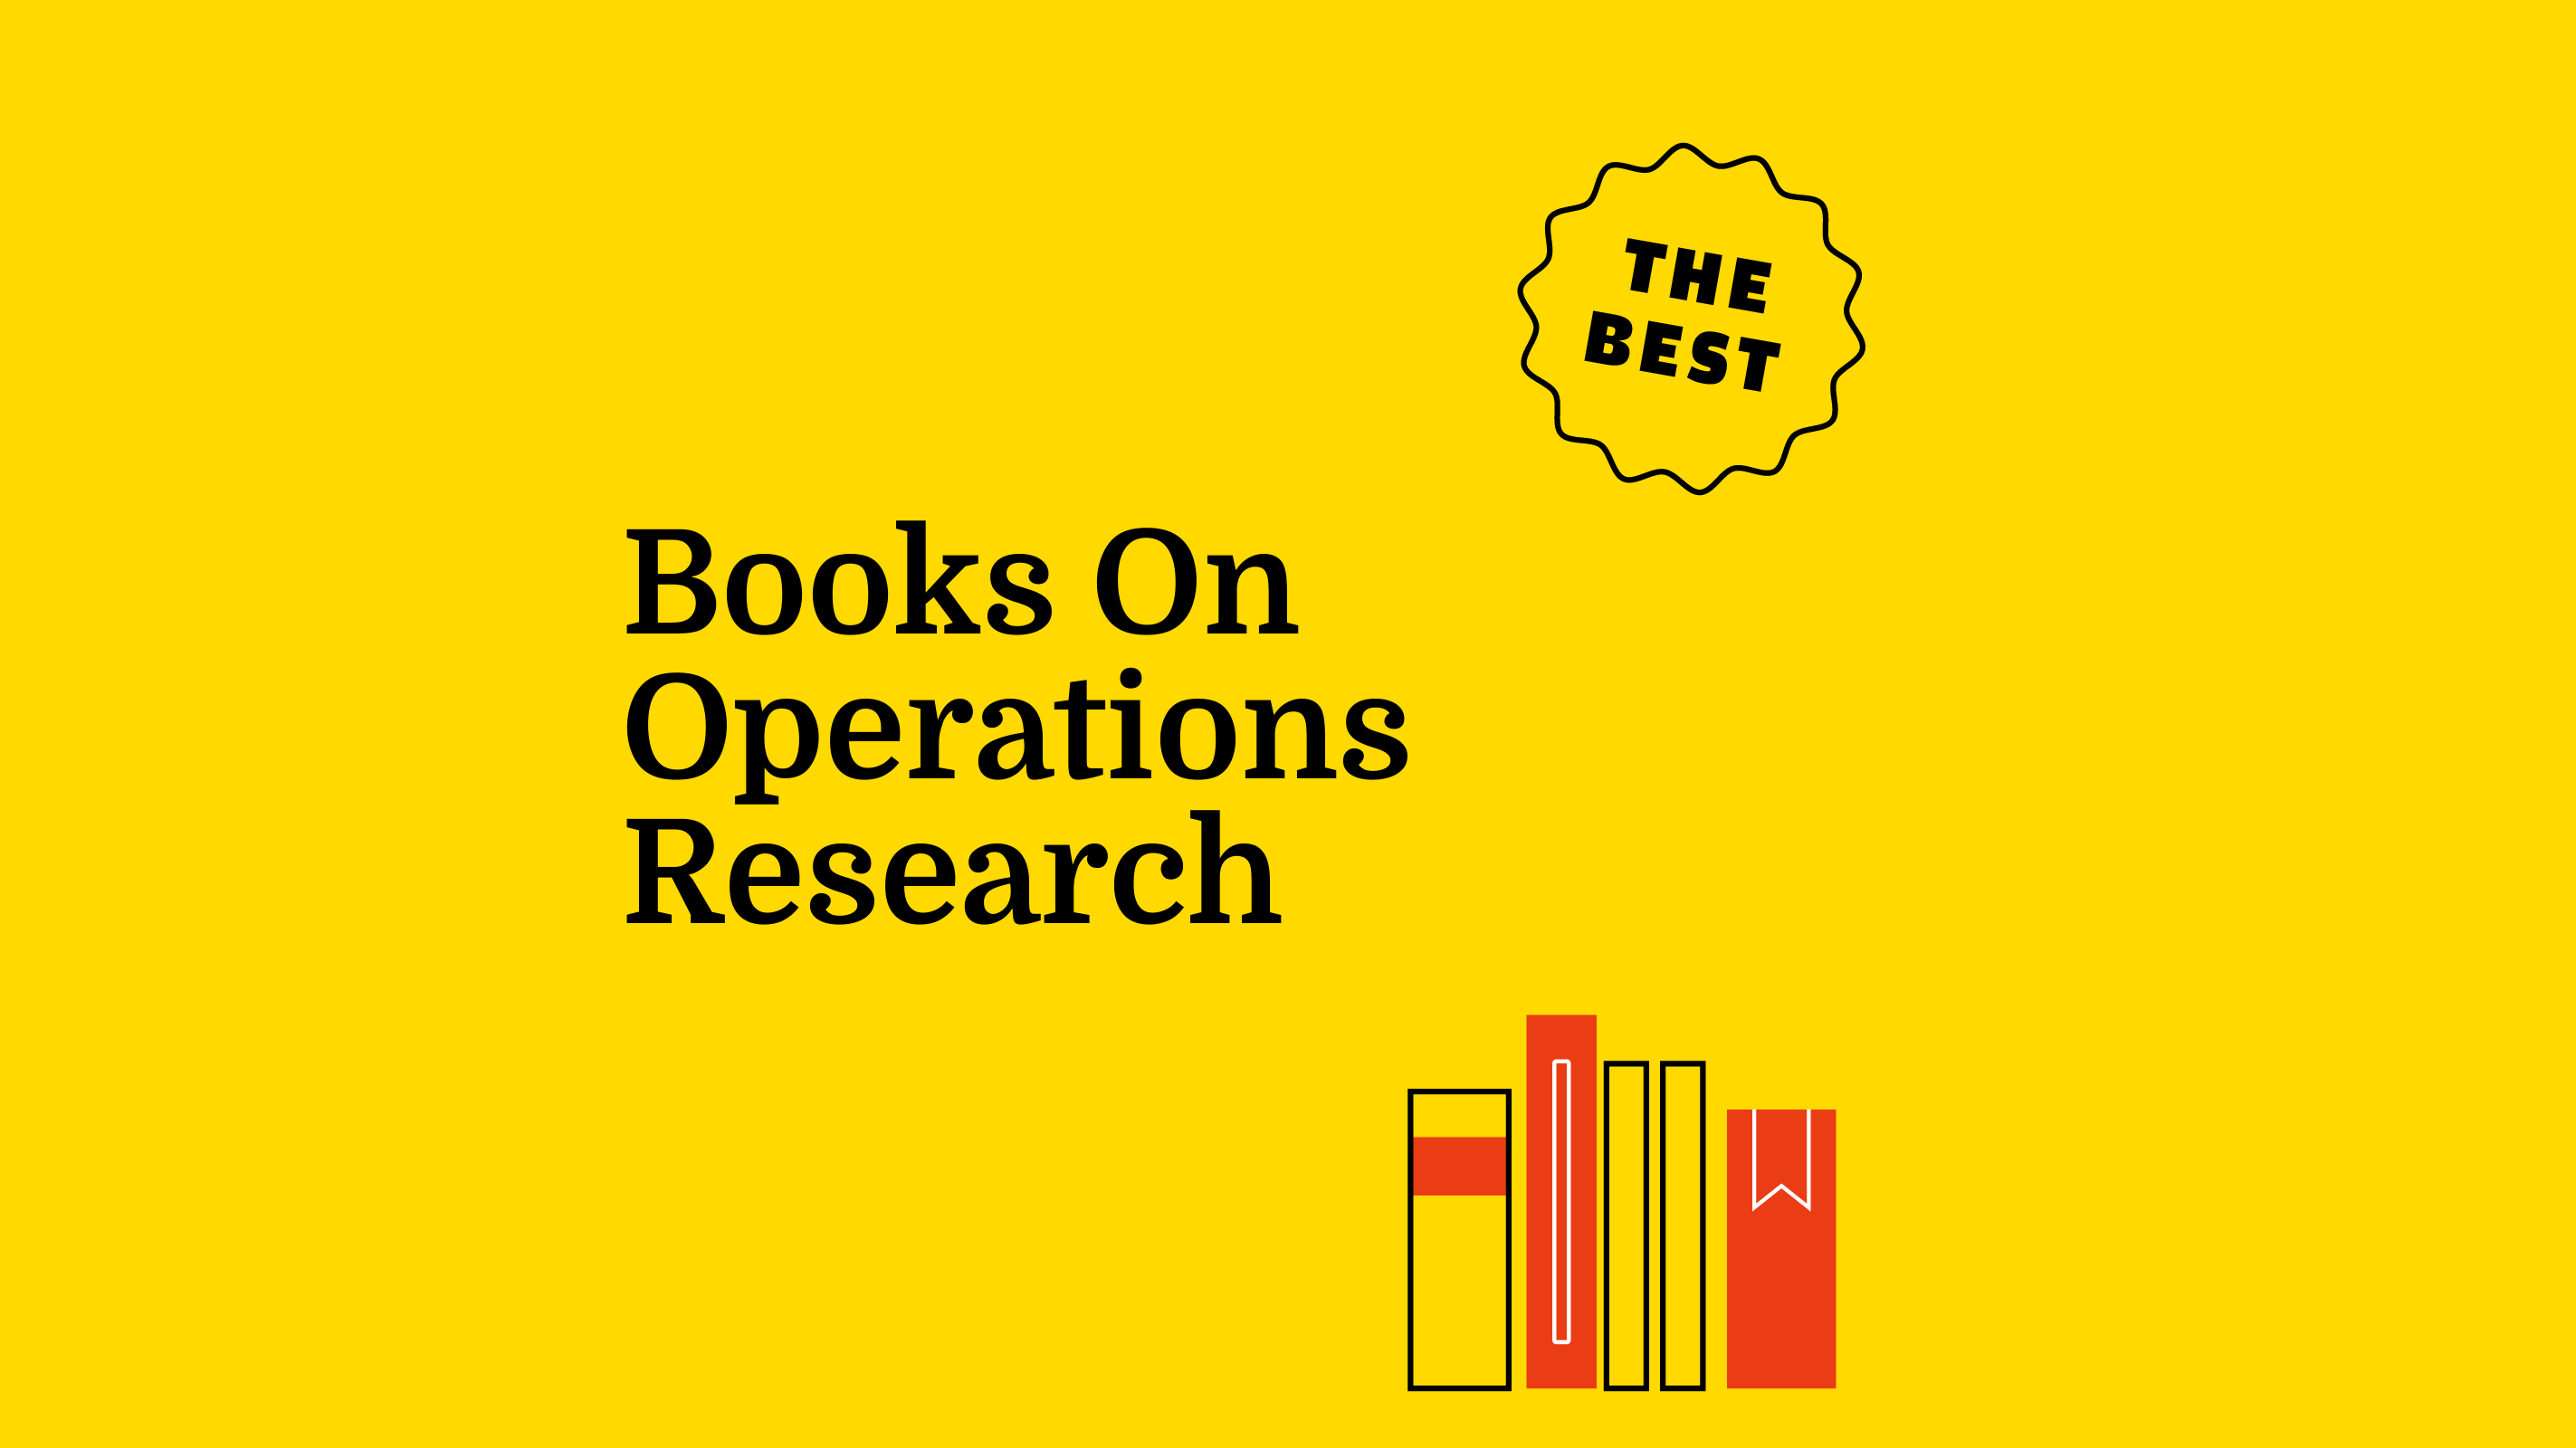 REV-books-on-operations-research-featured-image-3369